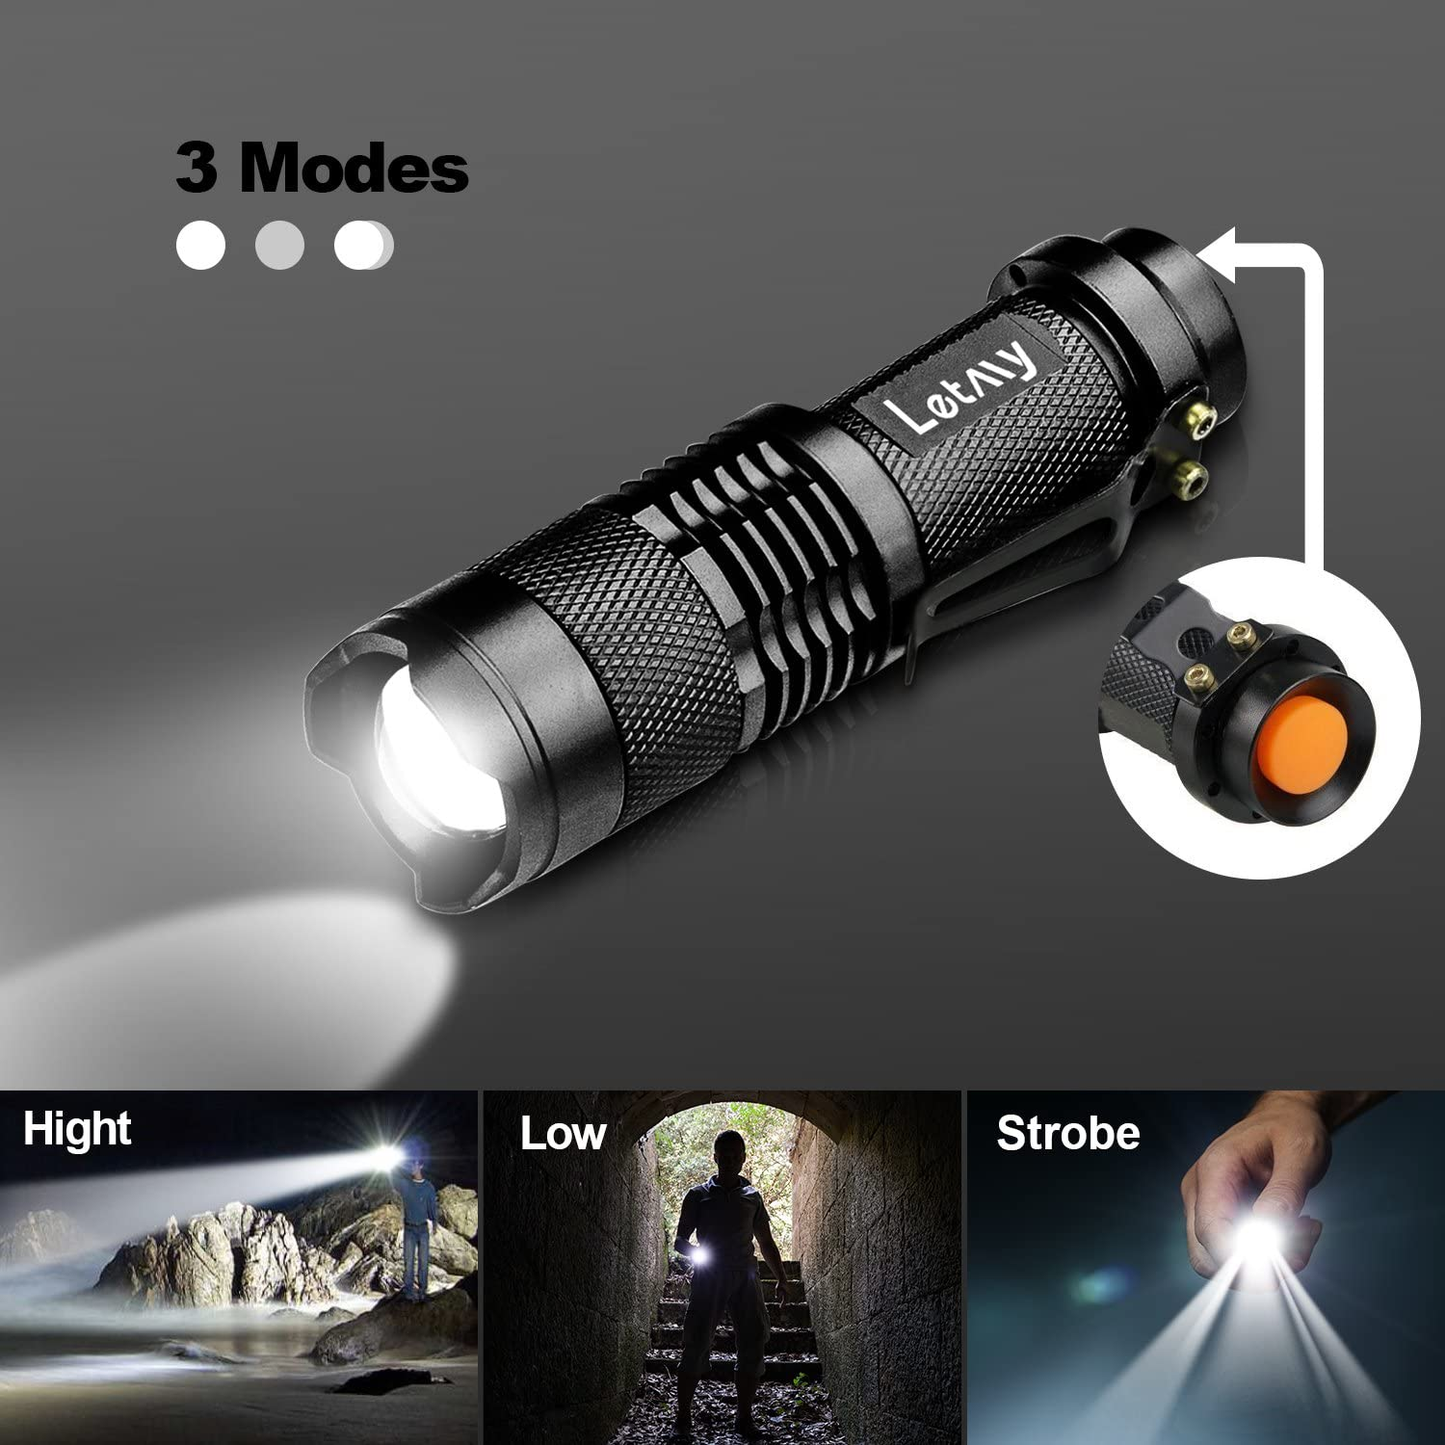 Tactical Flashlight, Super Bright LED Mini Flashlights with Belt Clip, Zoomable, 3 Modes, Waterproof - Best EDC Flashlight for Gift, Hiking, Camping & Power Outage (2 Pack)